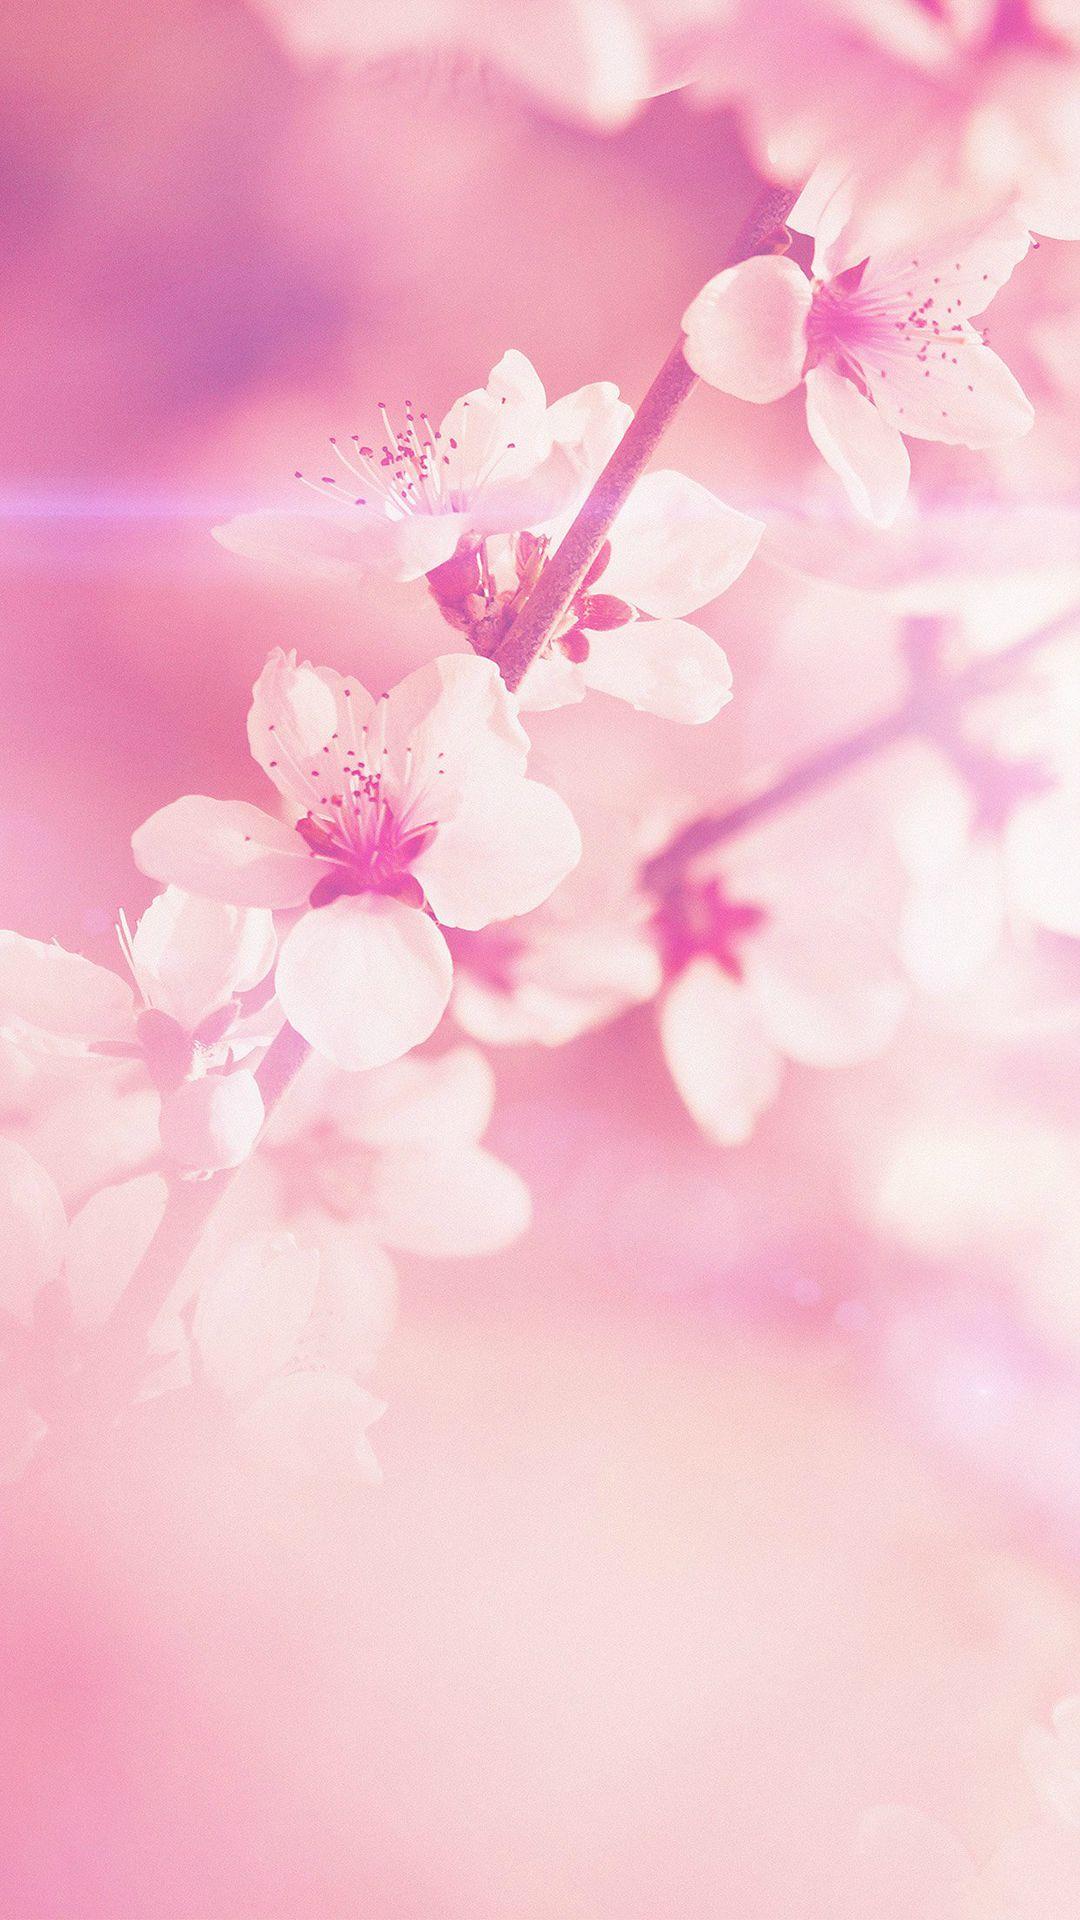 Light Pink Floral iPhone Wallpapers - Top Free Light Pink Floral iPhone